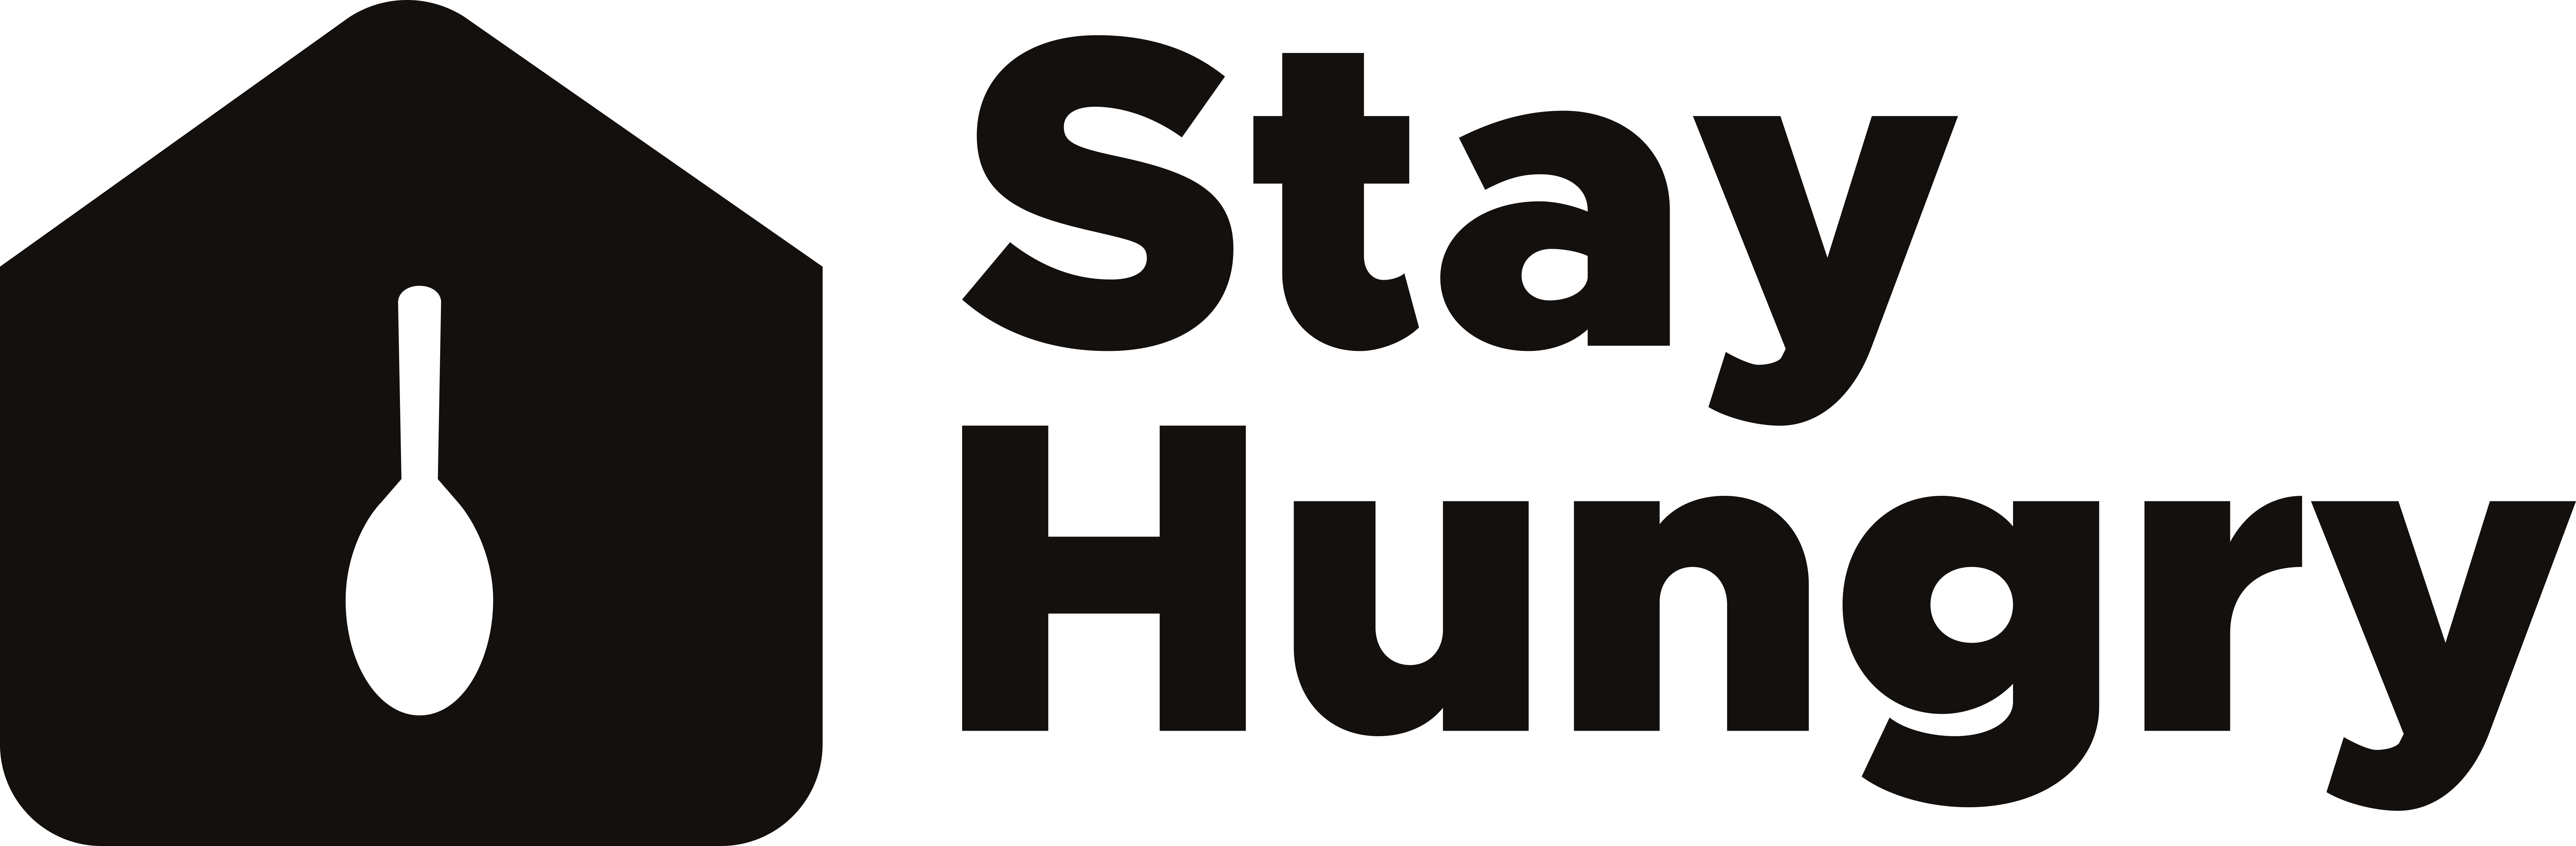 STAY HUNGRY LOGO